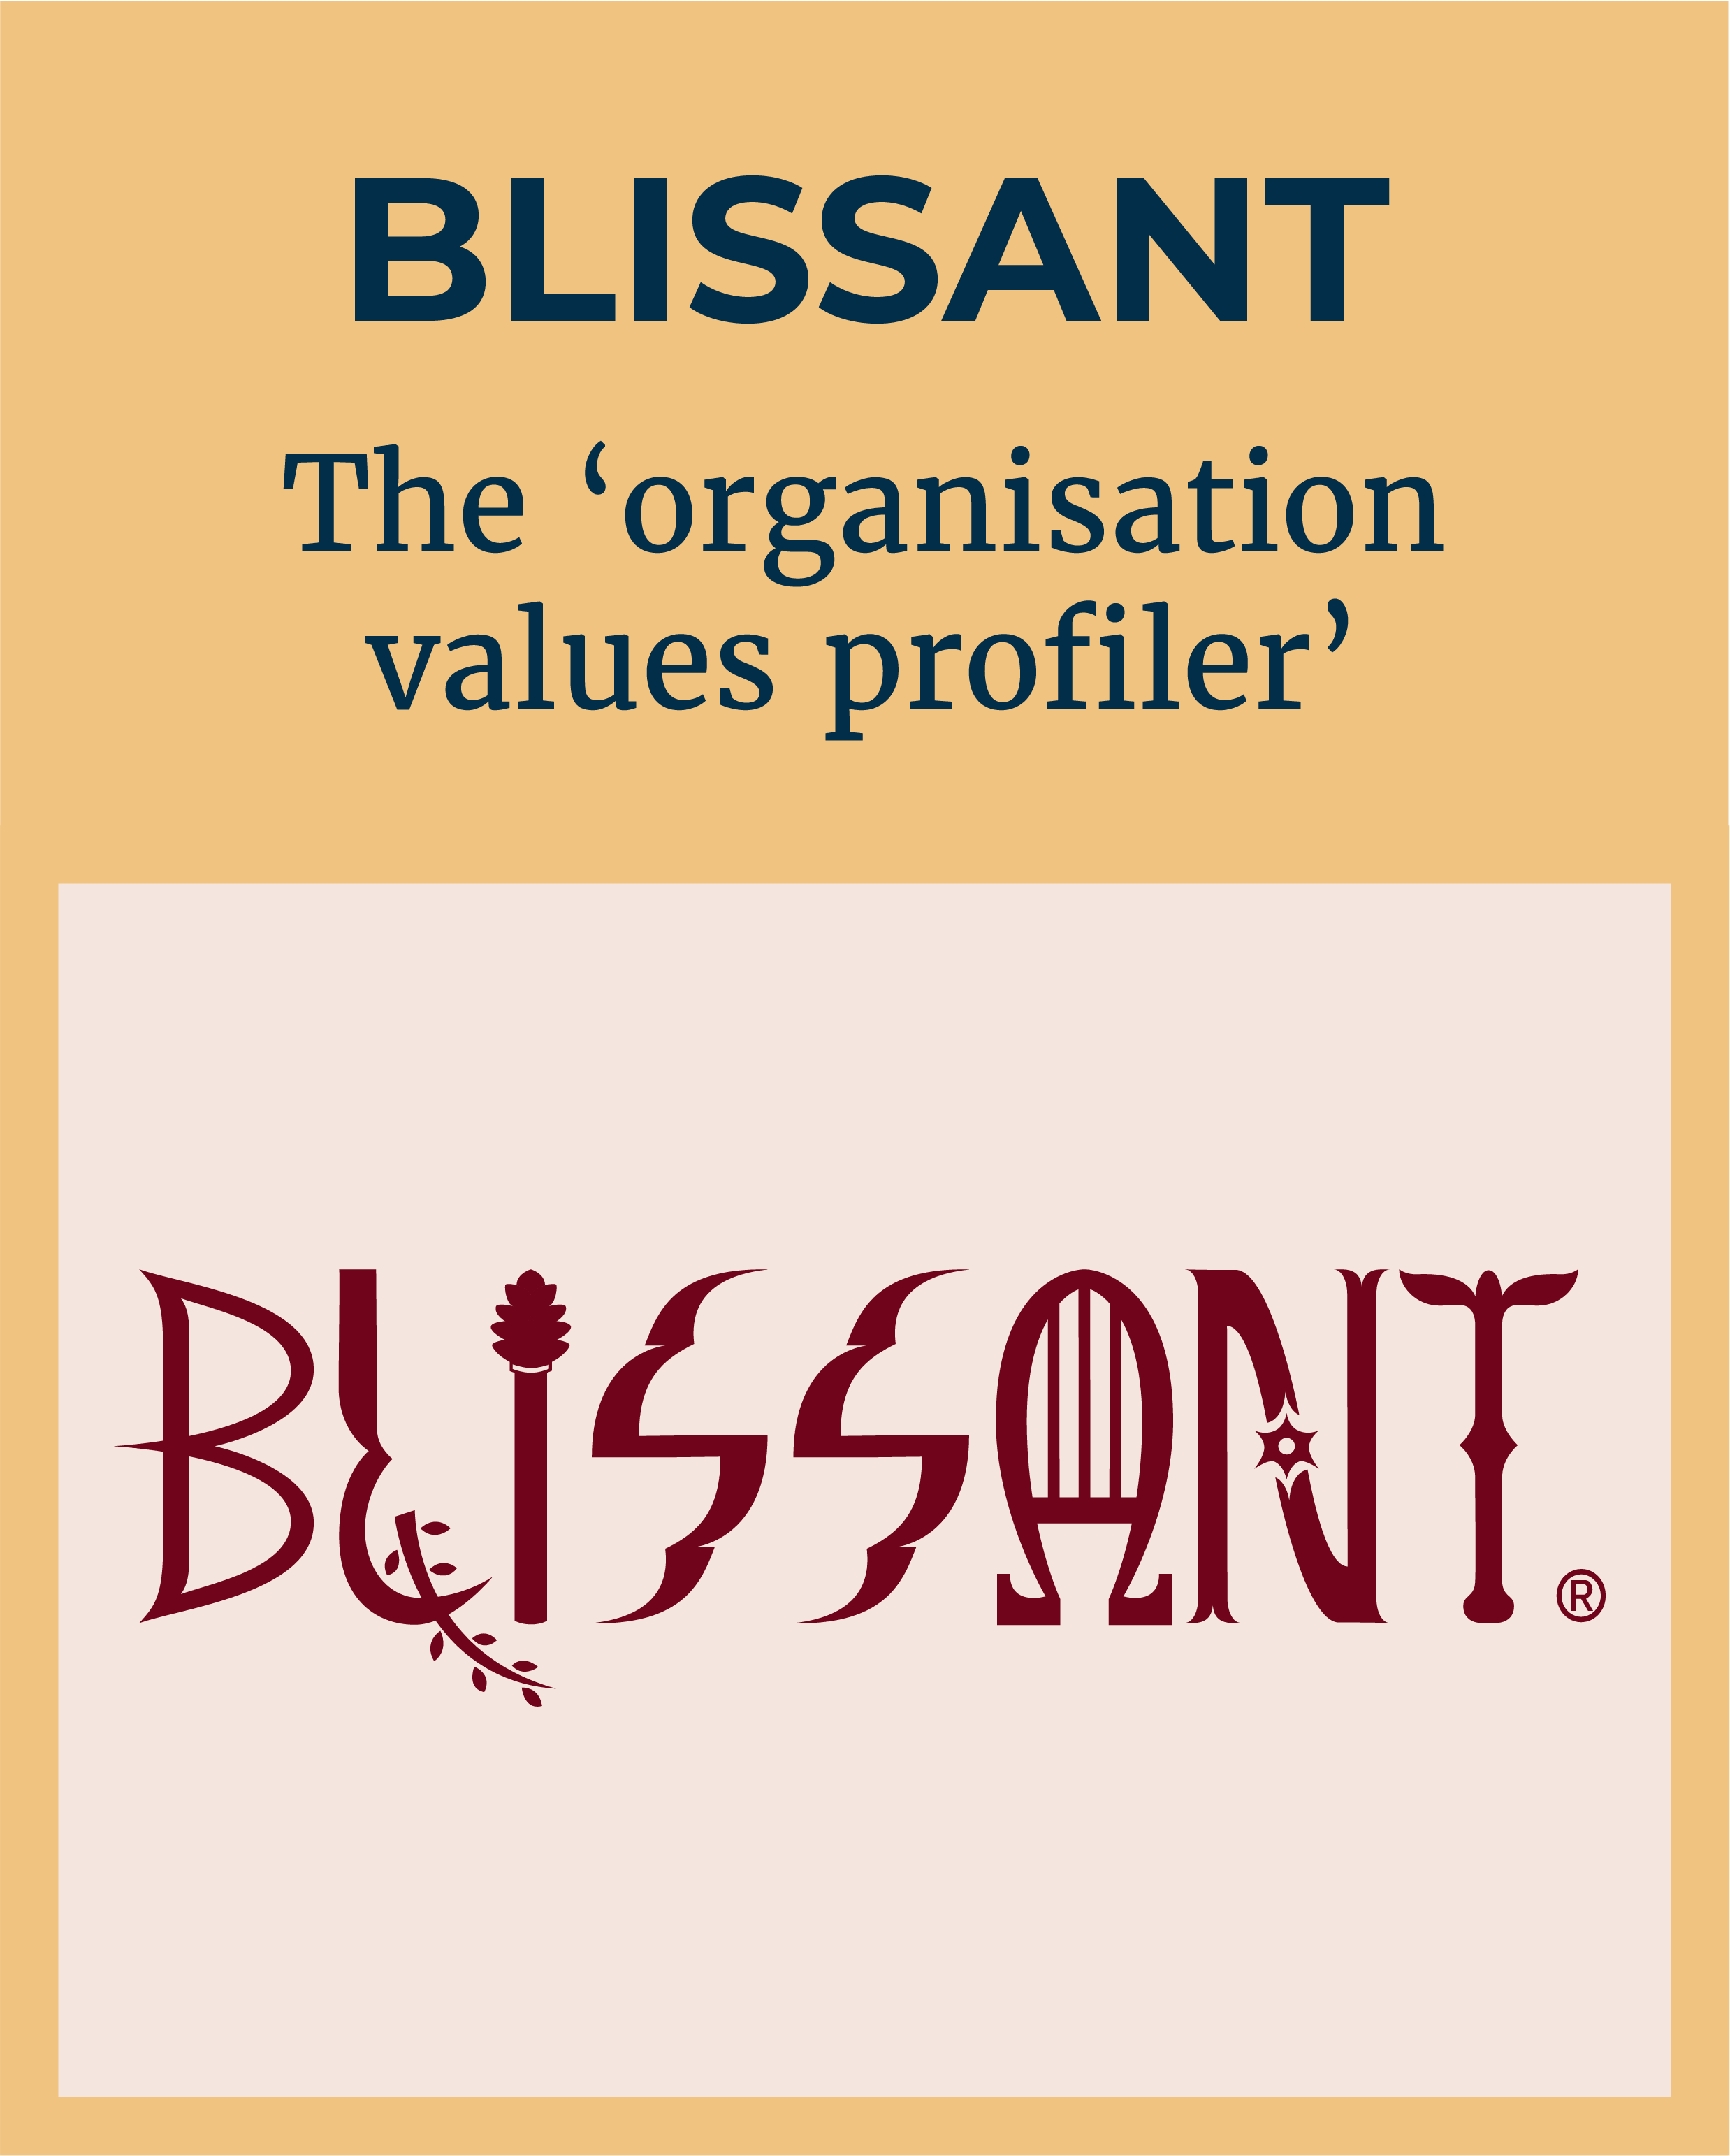 Logo of BLISSANT - the research product that is the 'organisation values profiler'